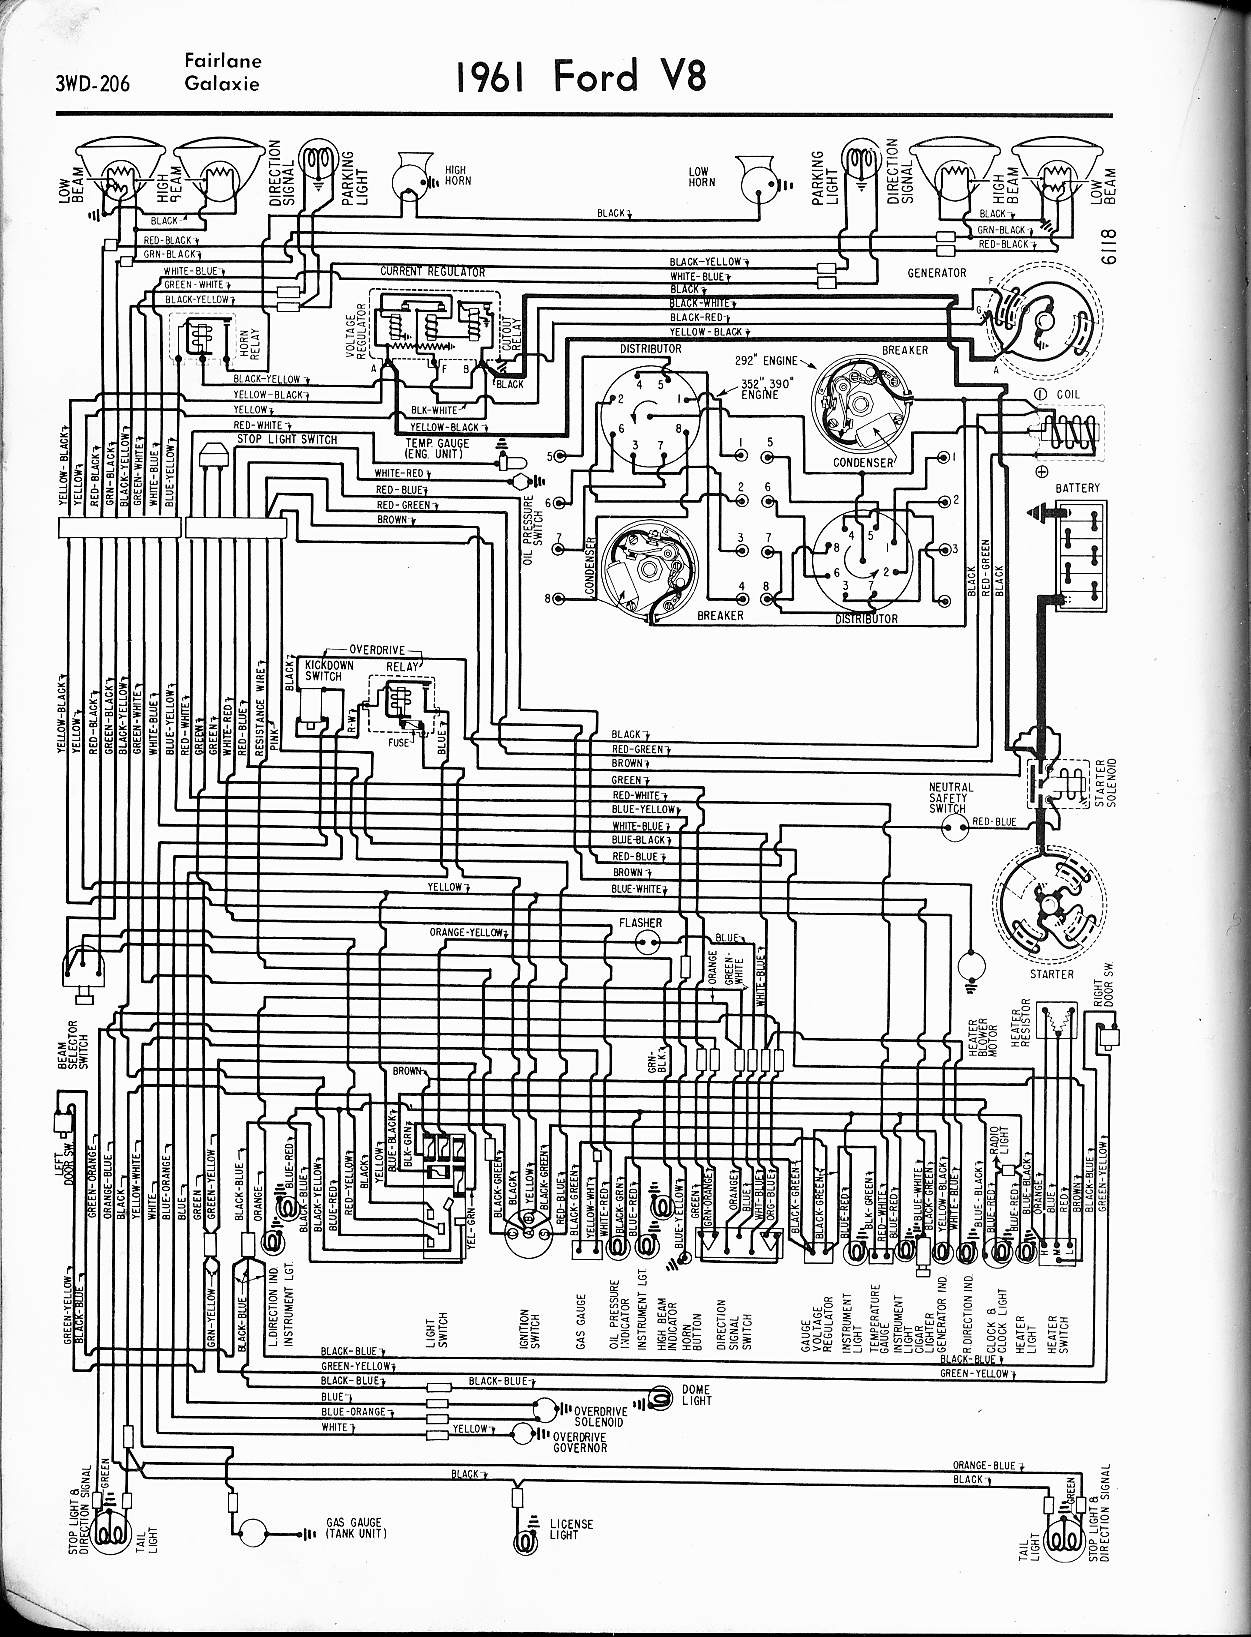 2000 ford Explorer Parts Diagram ford Wiring Diagram ford Wiring Diagram Http 1957 ford Wiring Of 2000 ford Explorer Parts Diagram